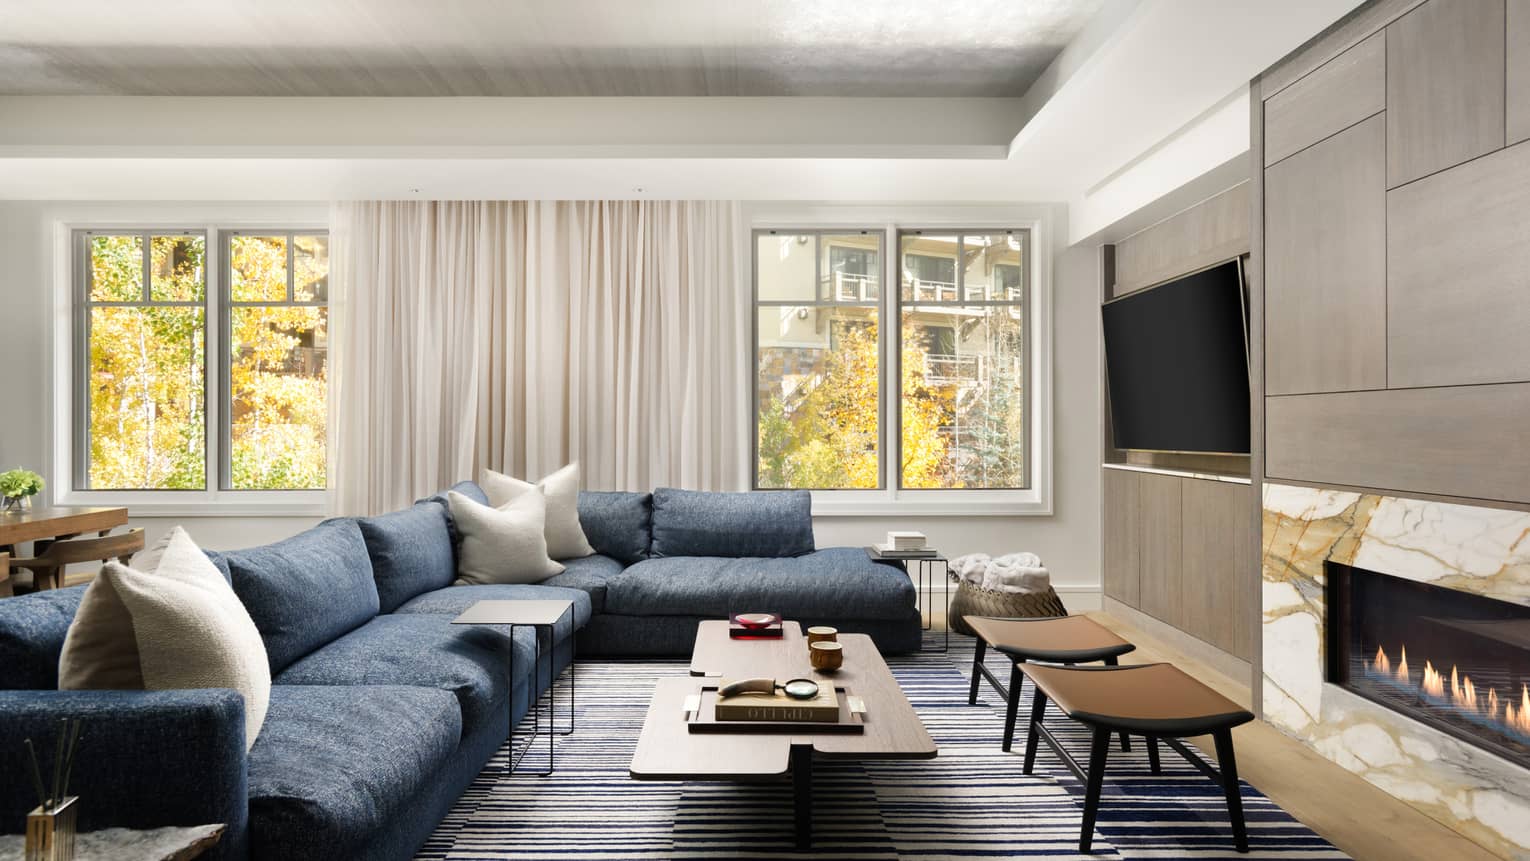 Living room with large blue sectional sofa, modern wooden coffee table, windows